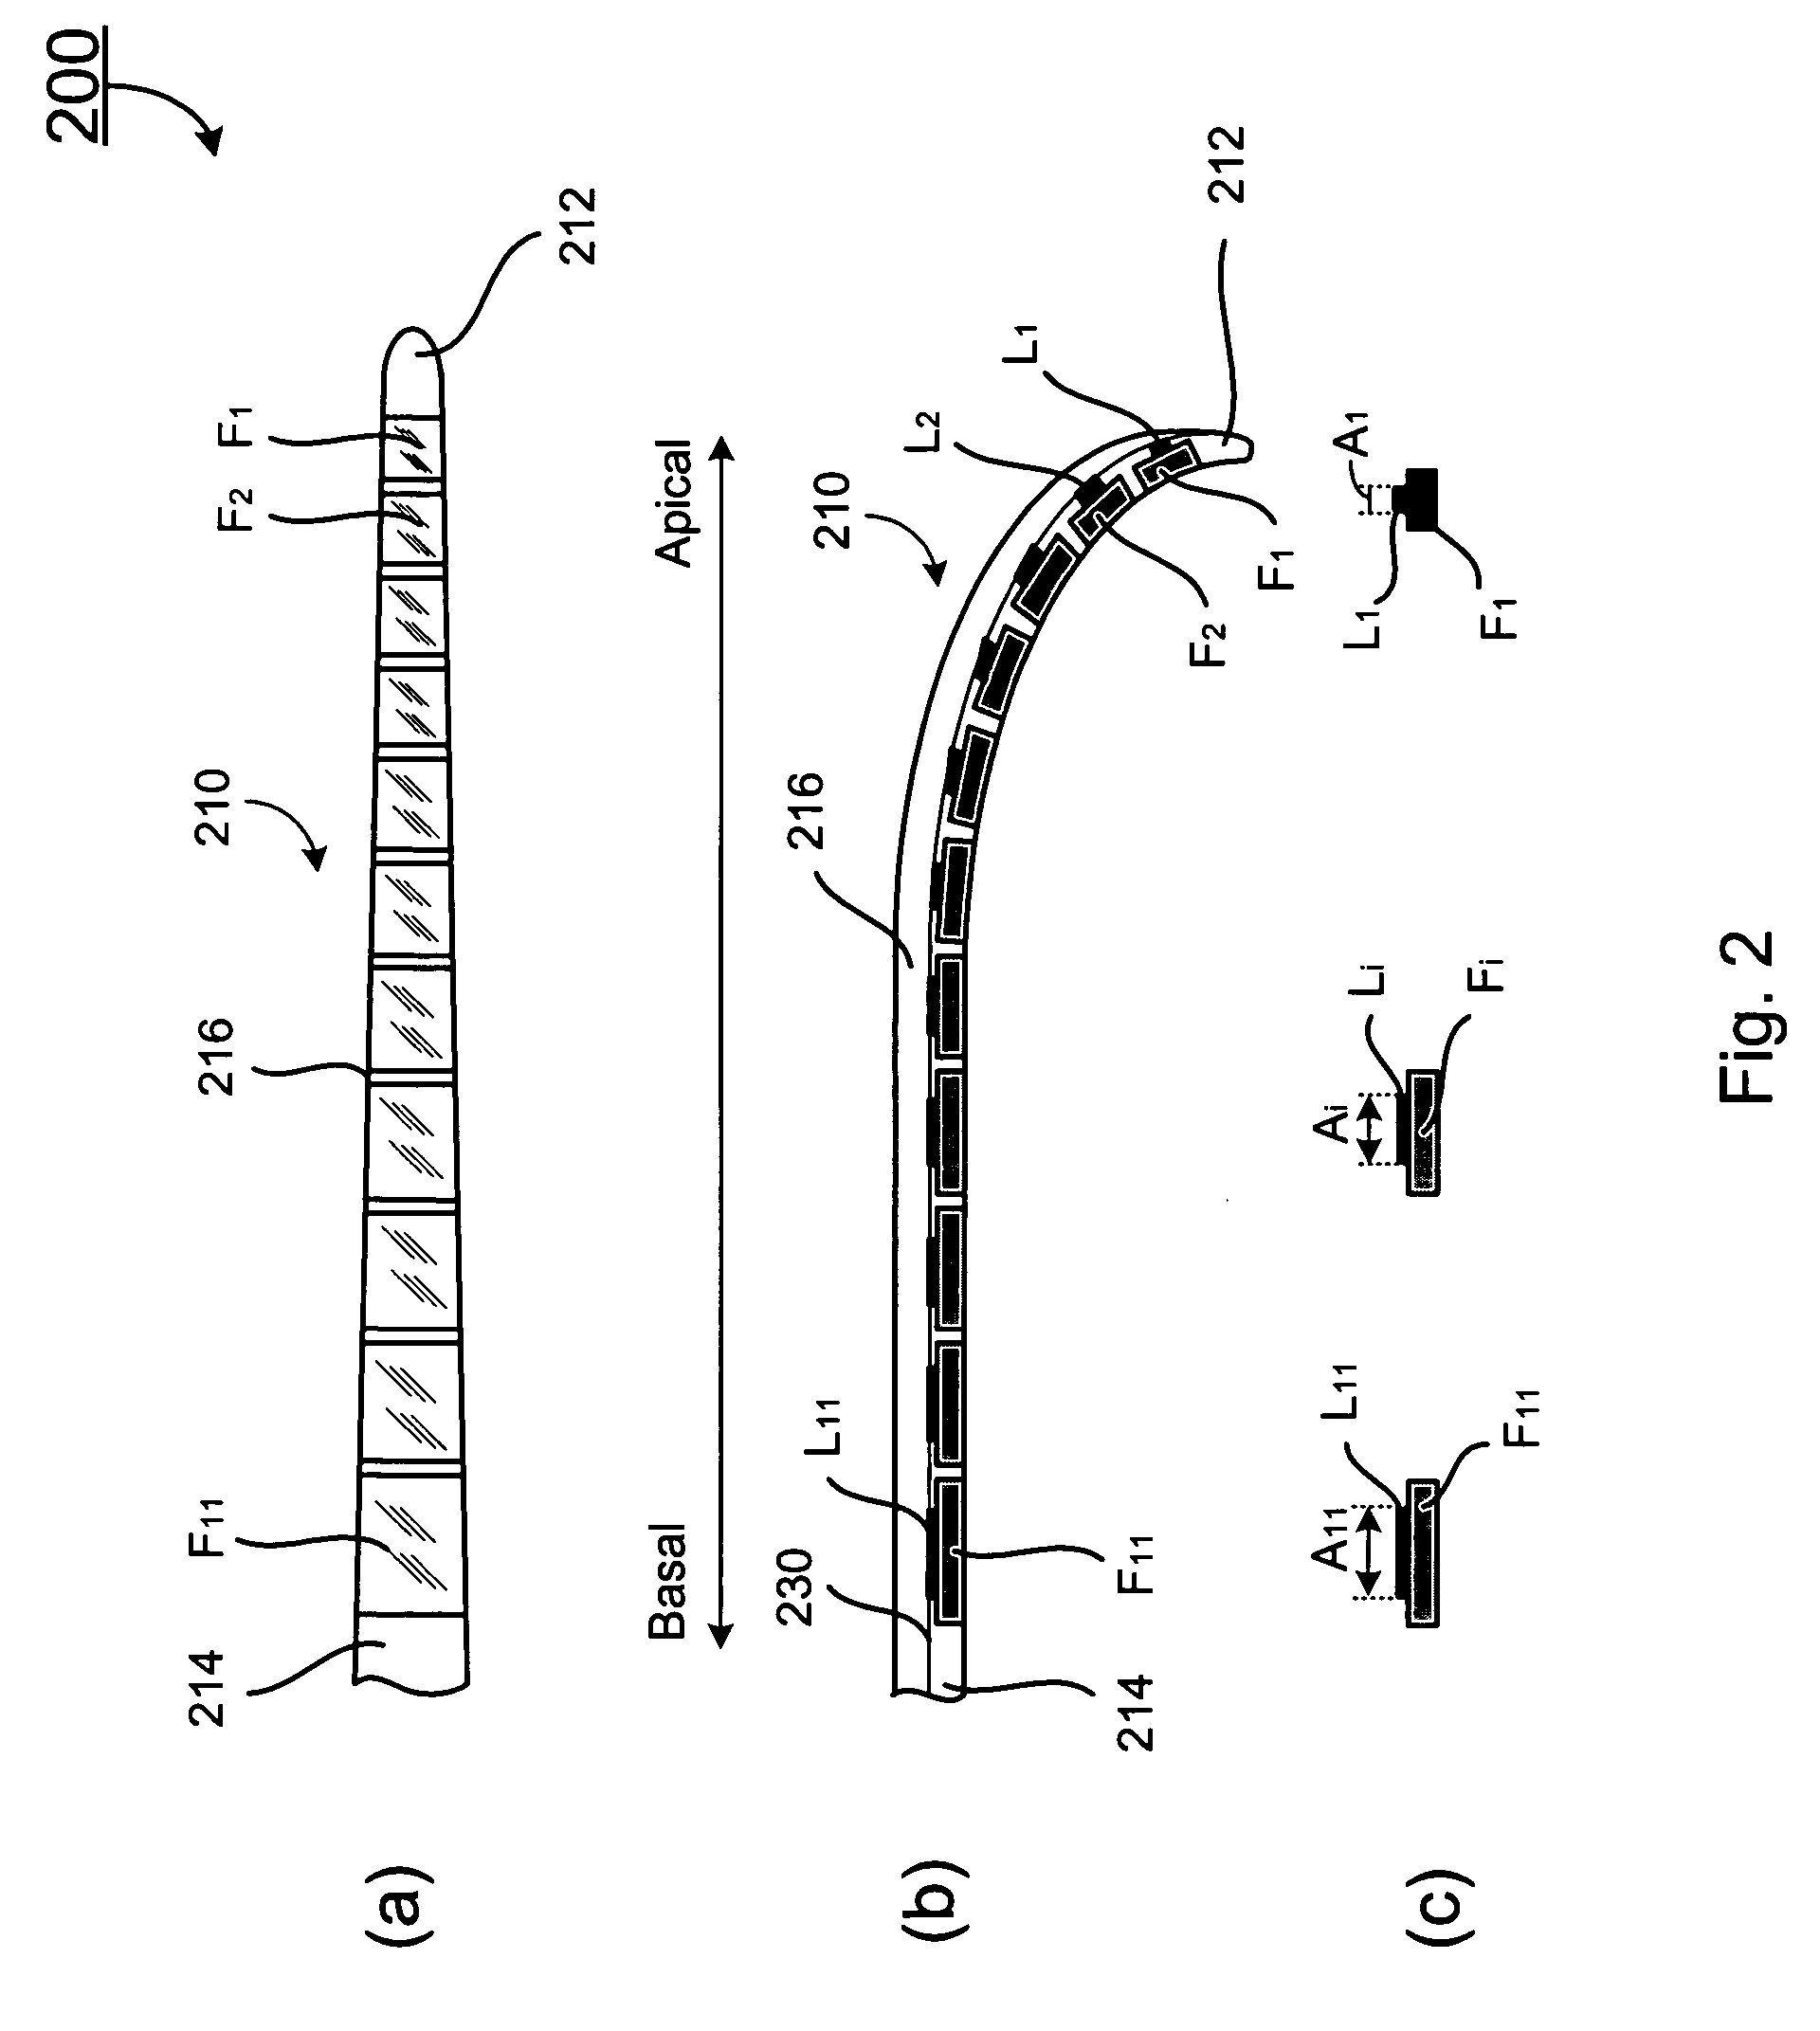 Apparatus and methods for optical stimulation of the auditory nerve